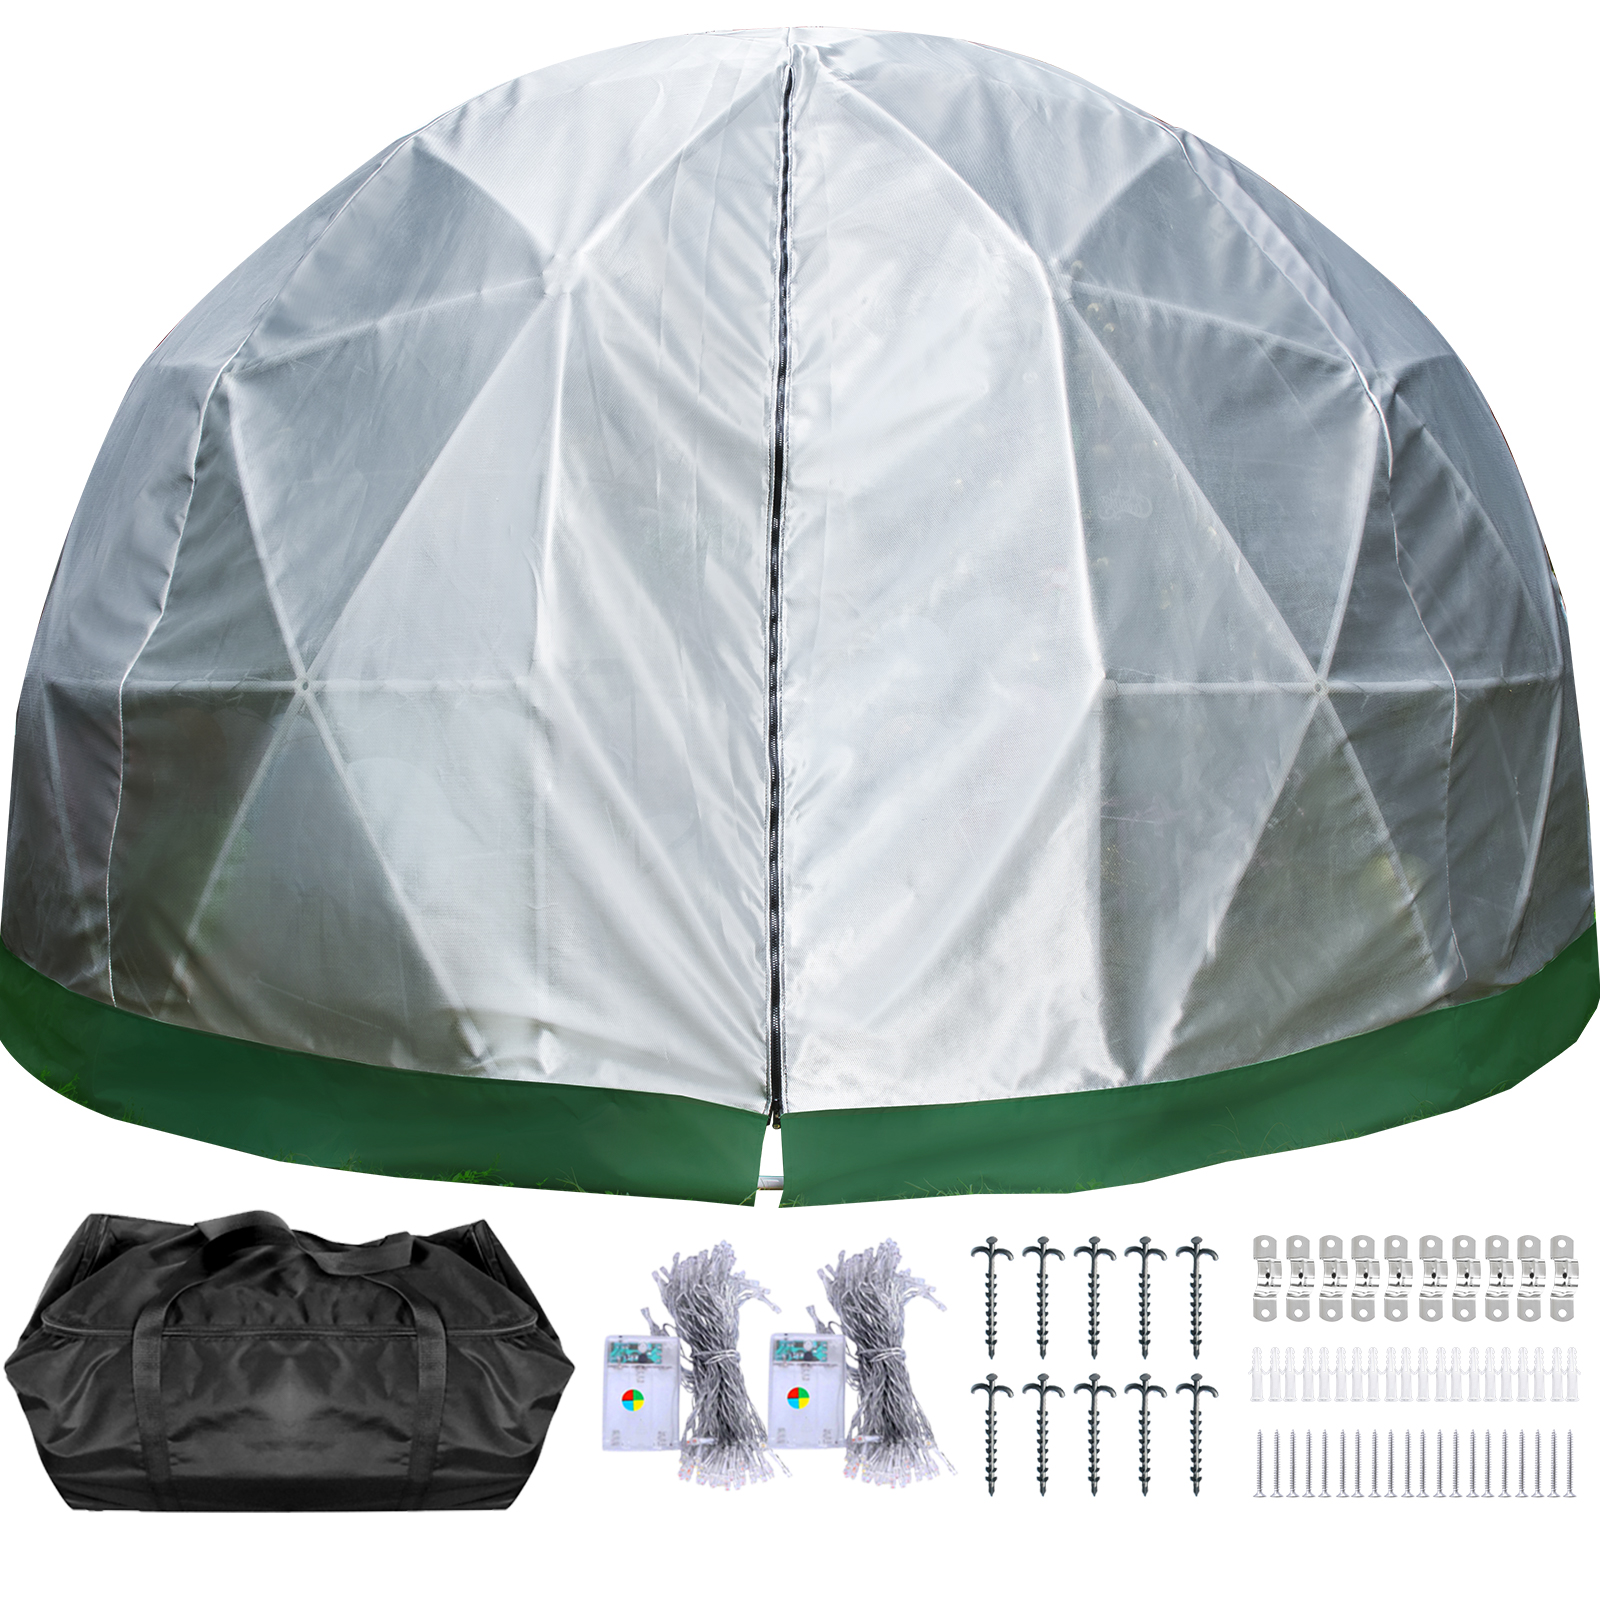 Vevor Garden Igloo Bubble Tent 12ft Polyester Mesh Canopy Walk In Gazebo Dome от Vevor Many GEOs